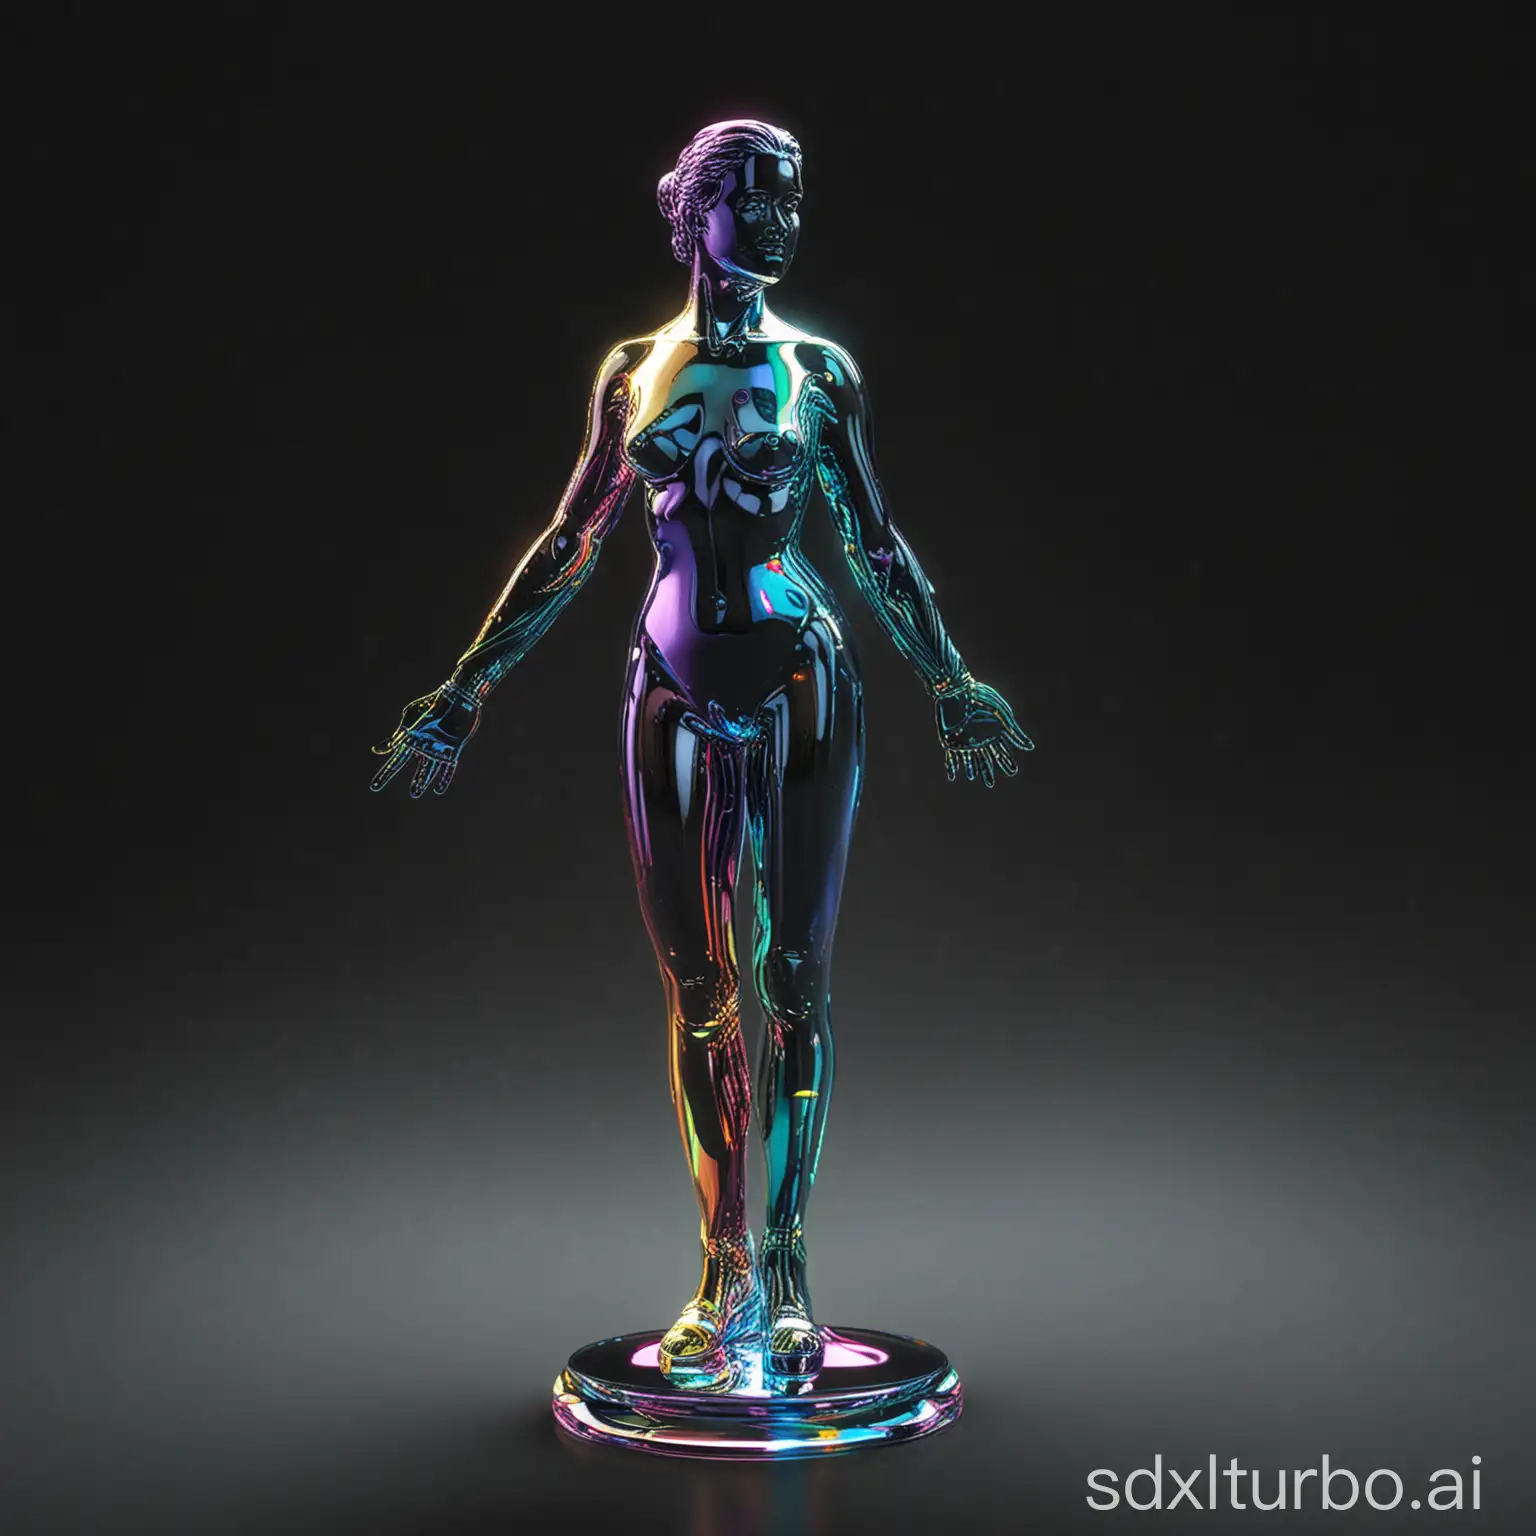 Glass figure 3D rendered, digital, modern era, multicolour with emphasis on iridescence and lighting effects, on black background